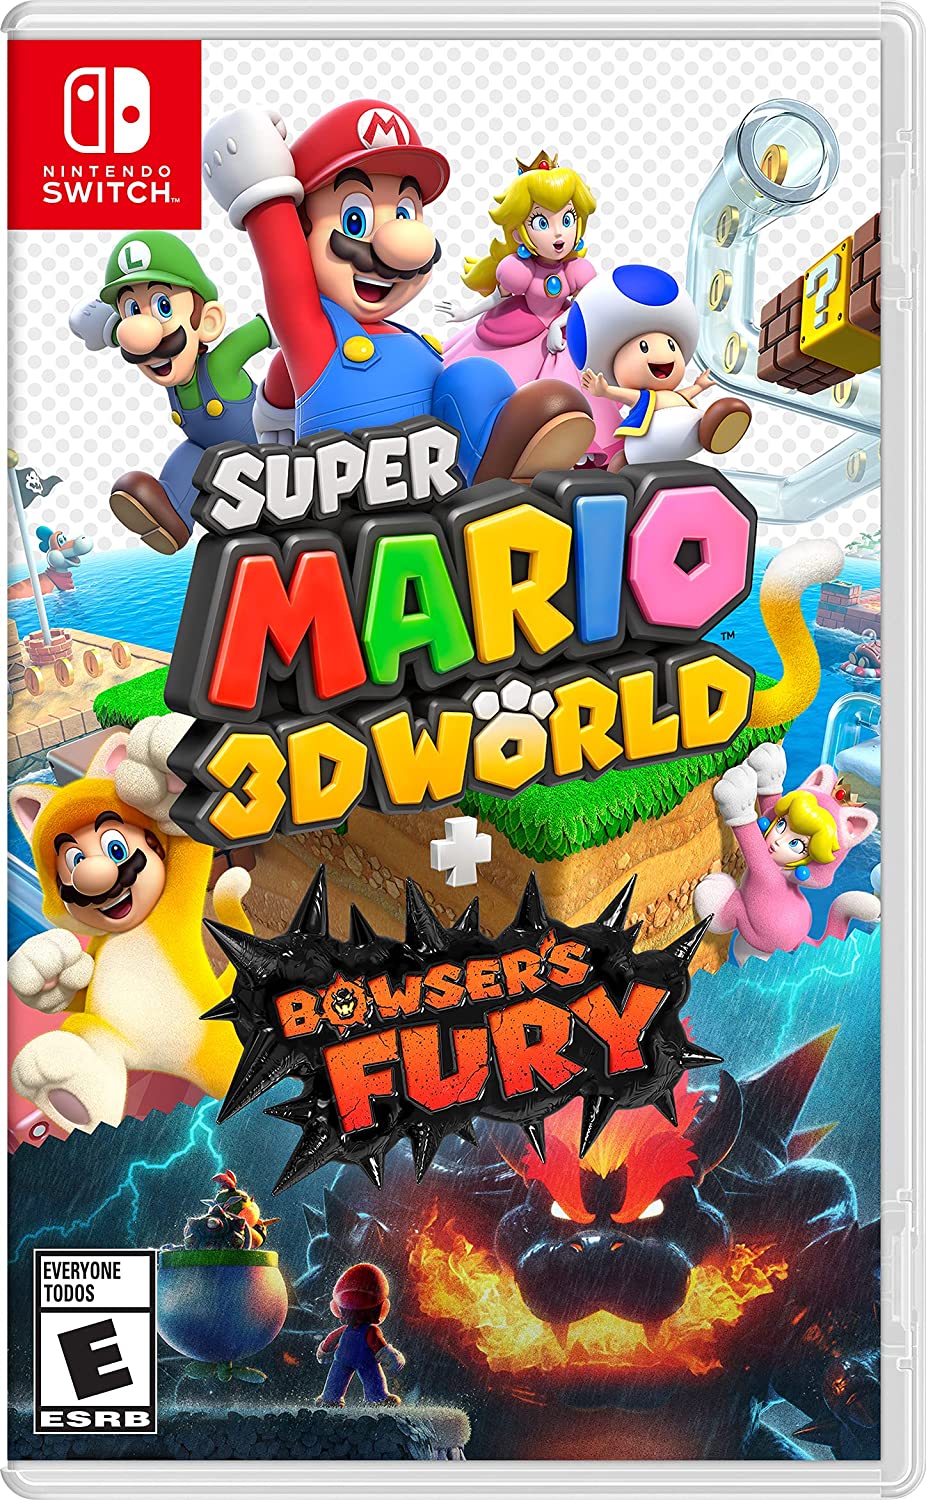 Super Mario 3D World + Bowser's Fury cover artwork for Nintendo Switch.